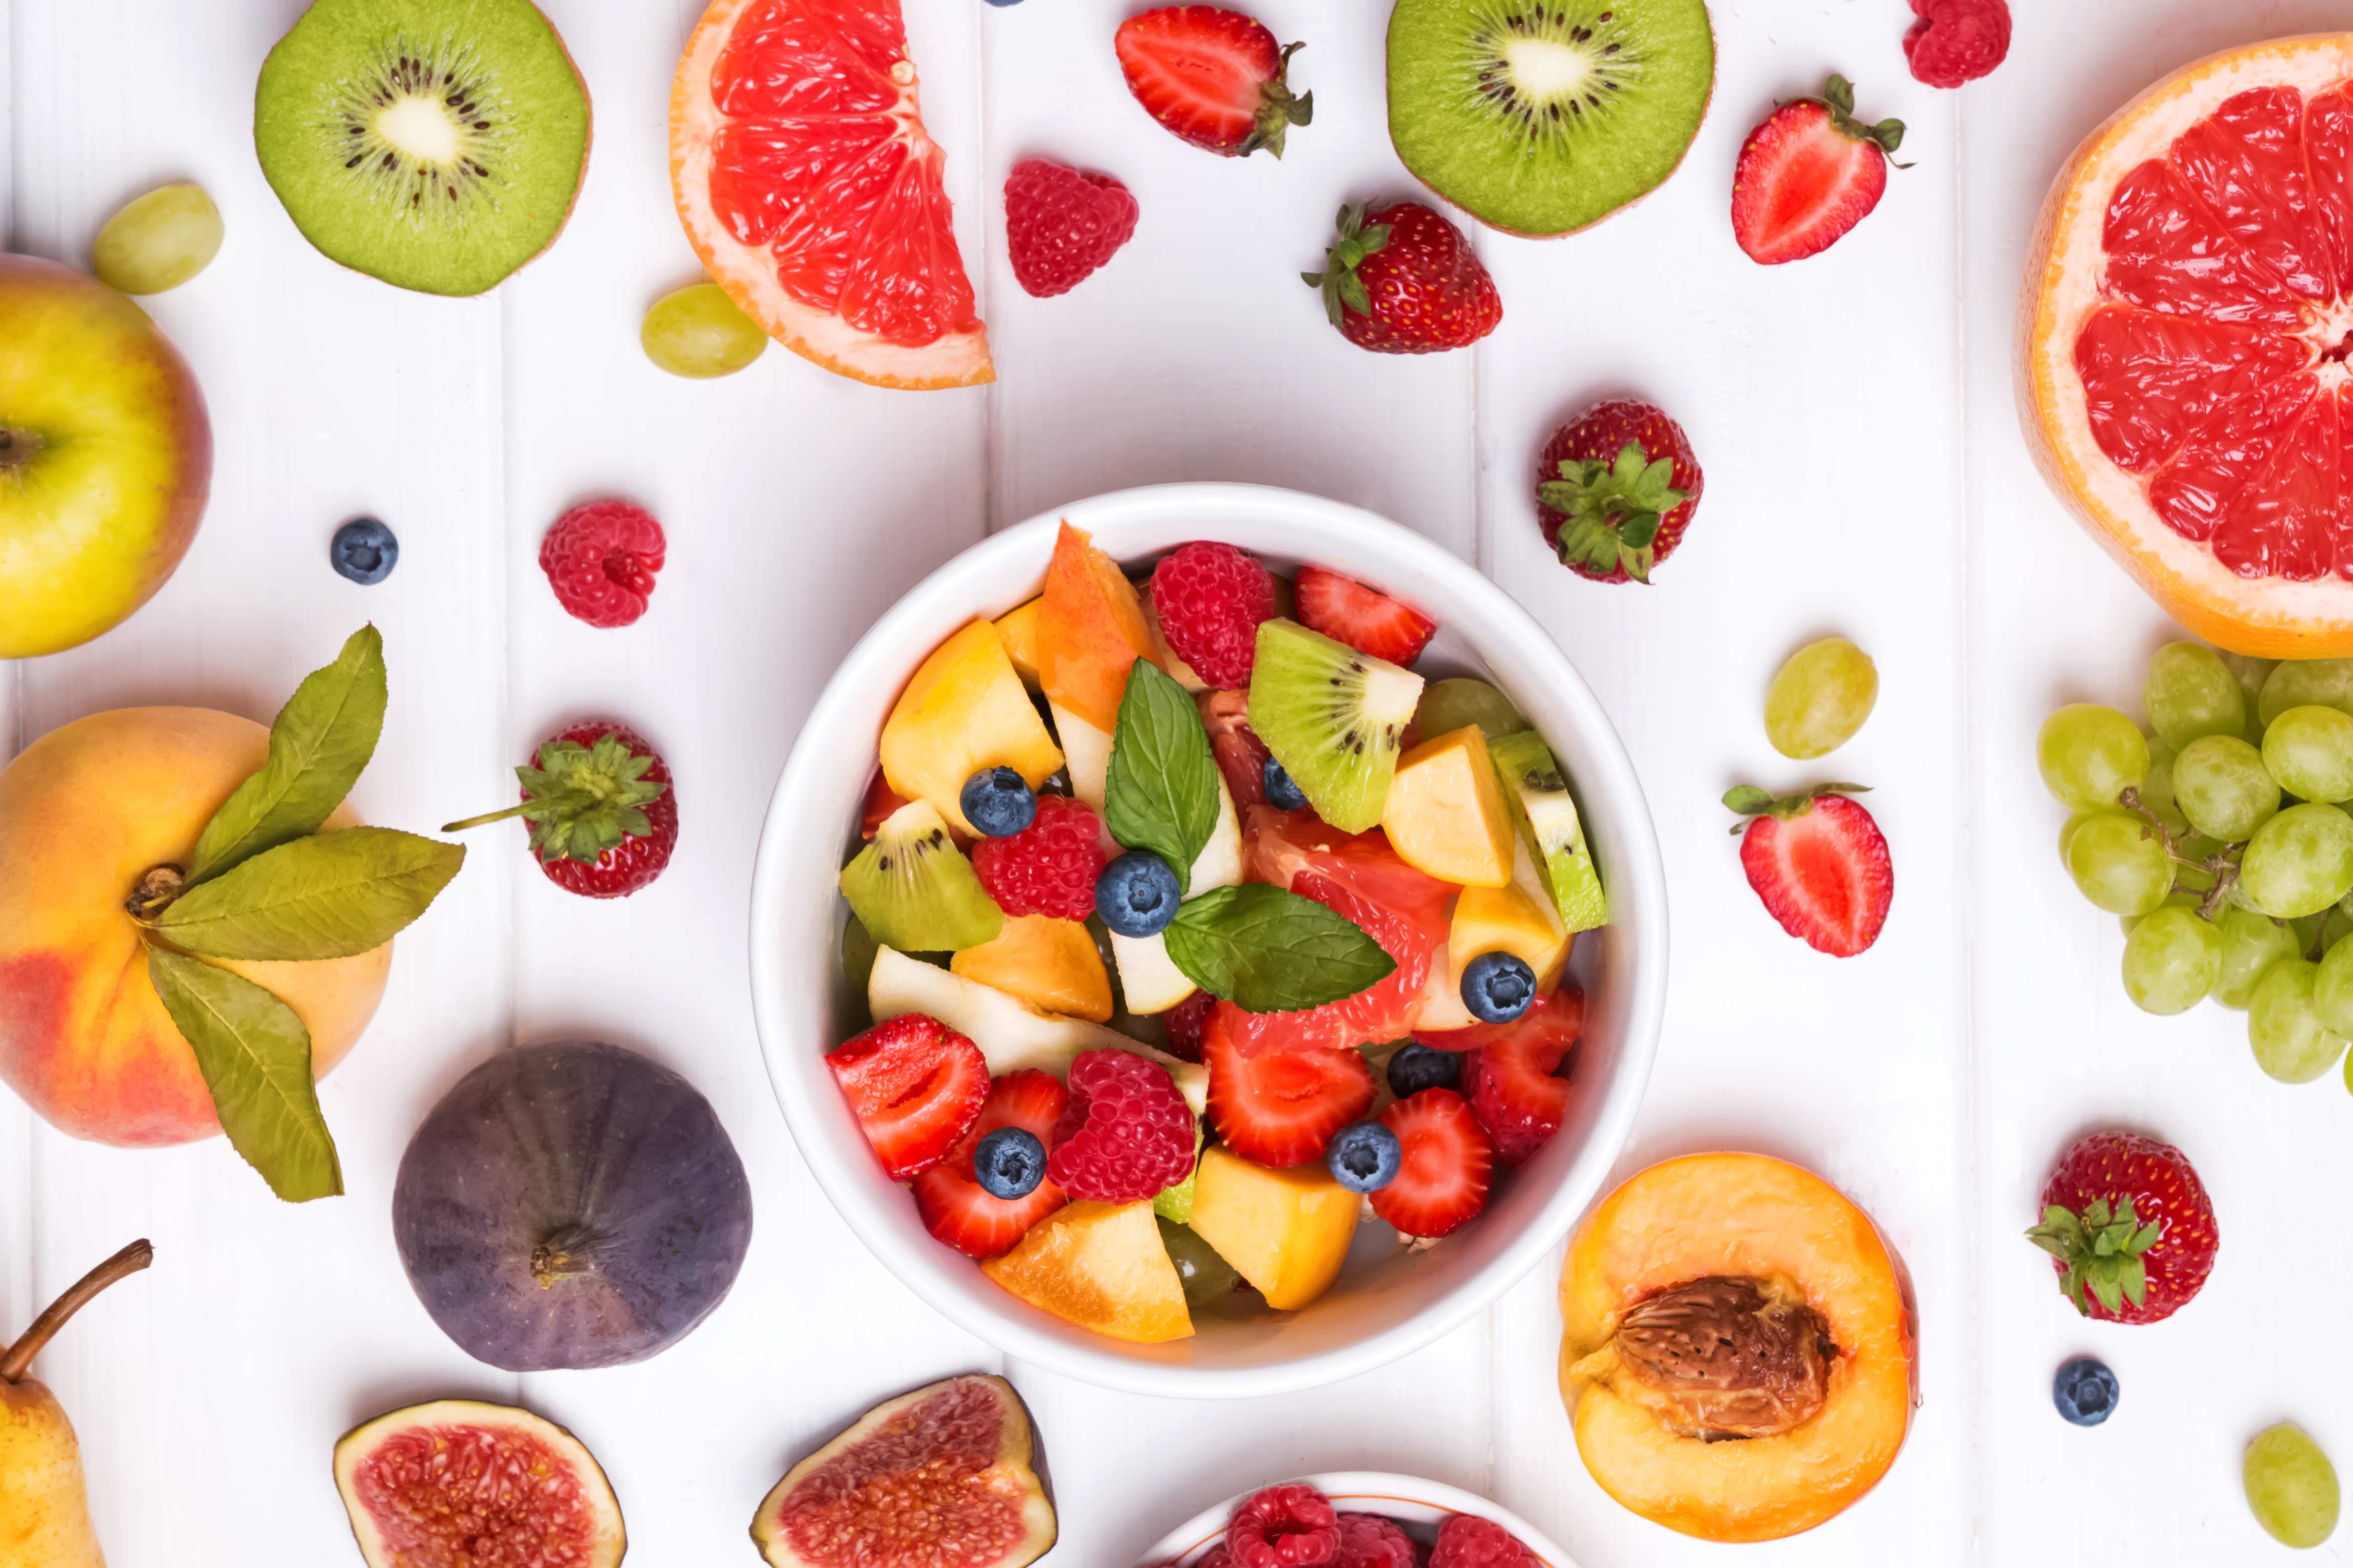 Get Creative with Fresh Fruit Salads